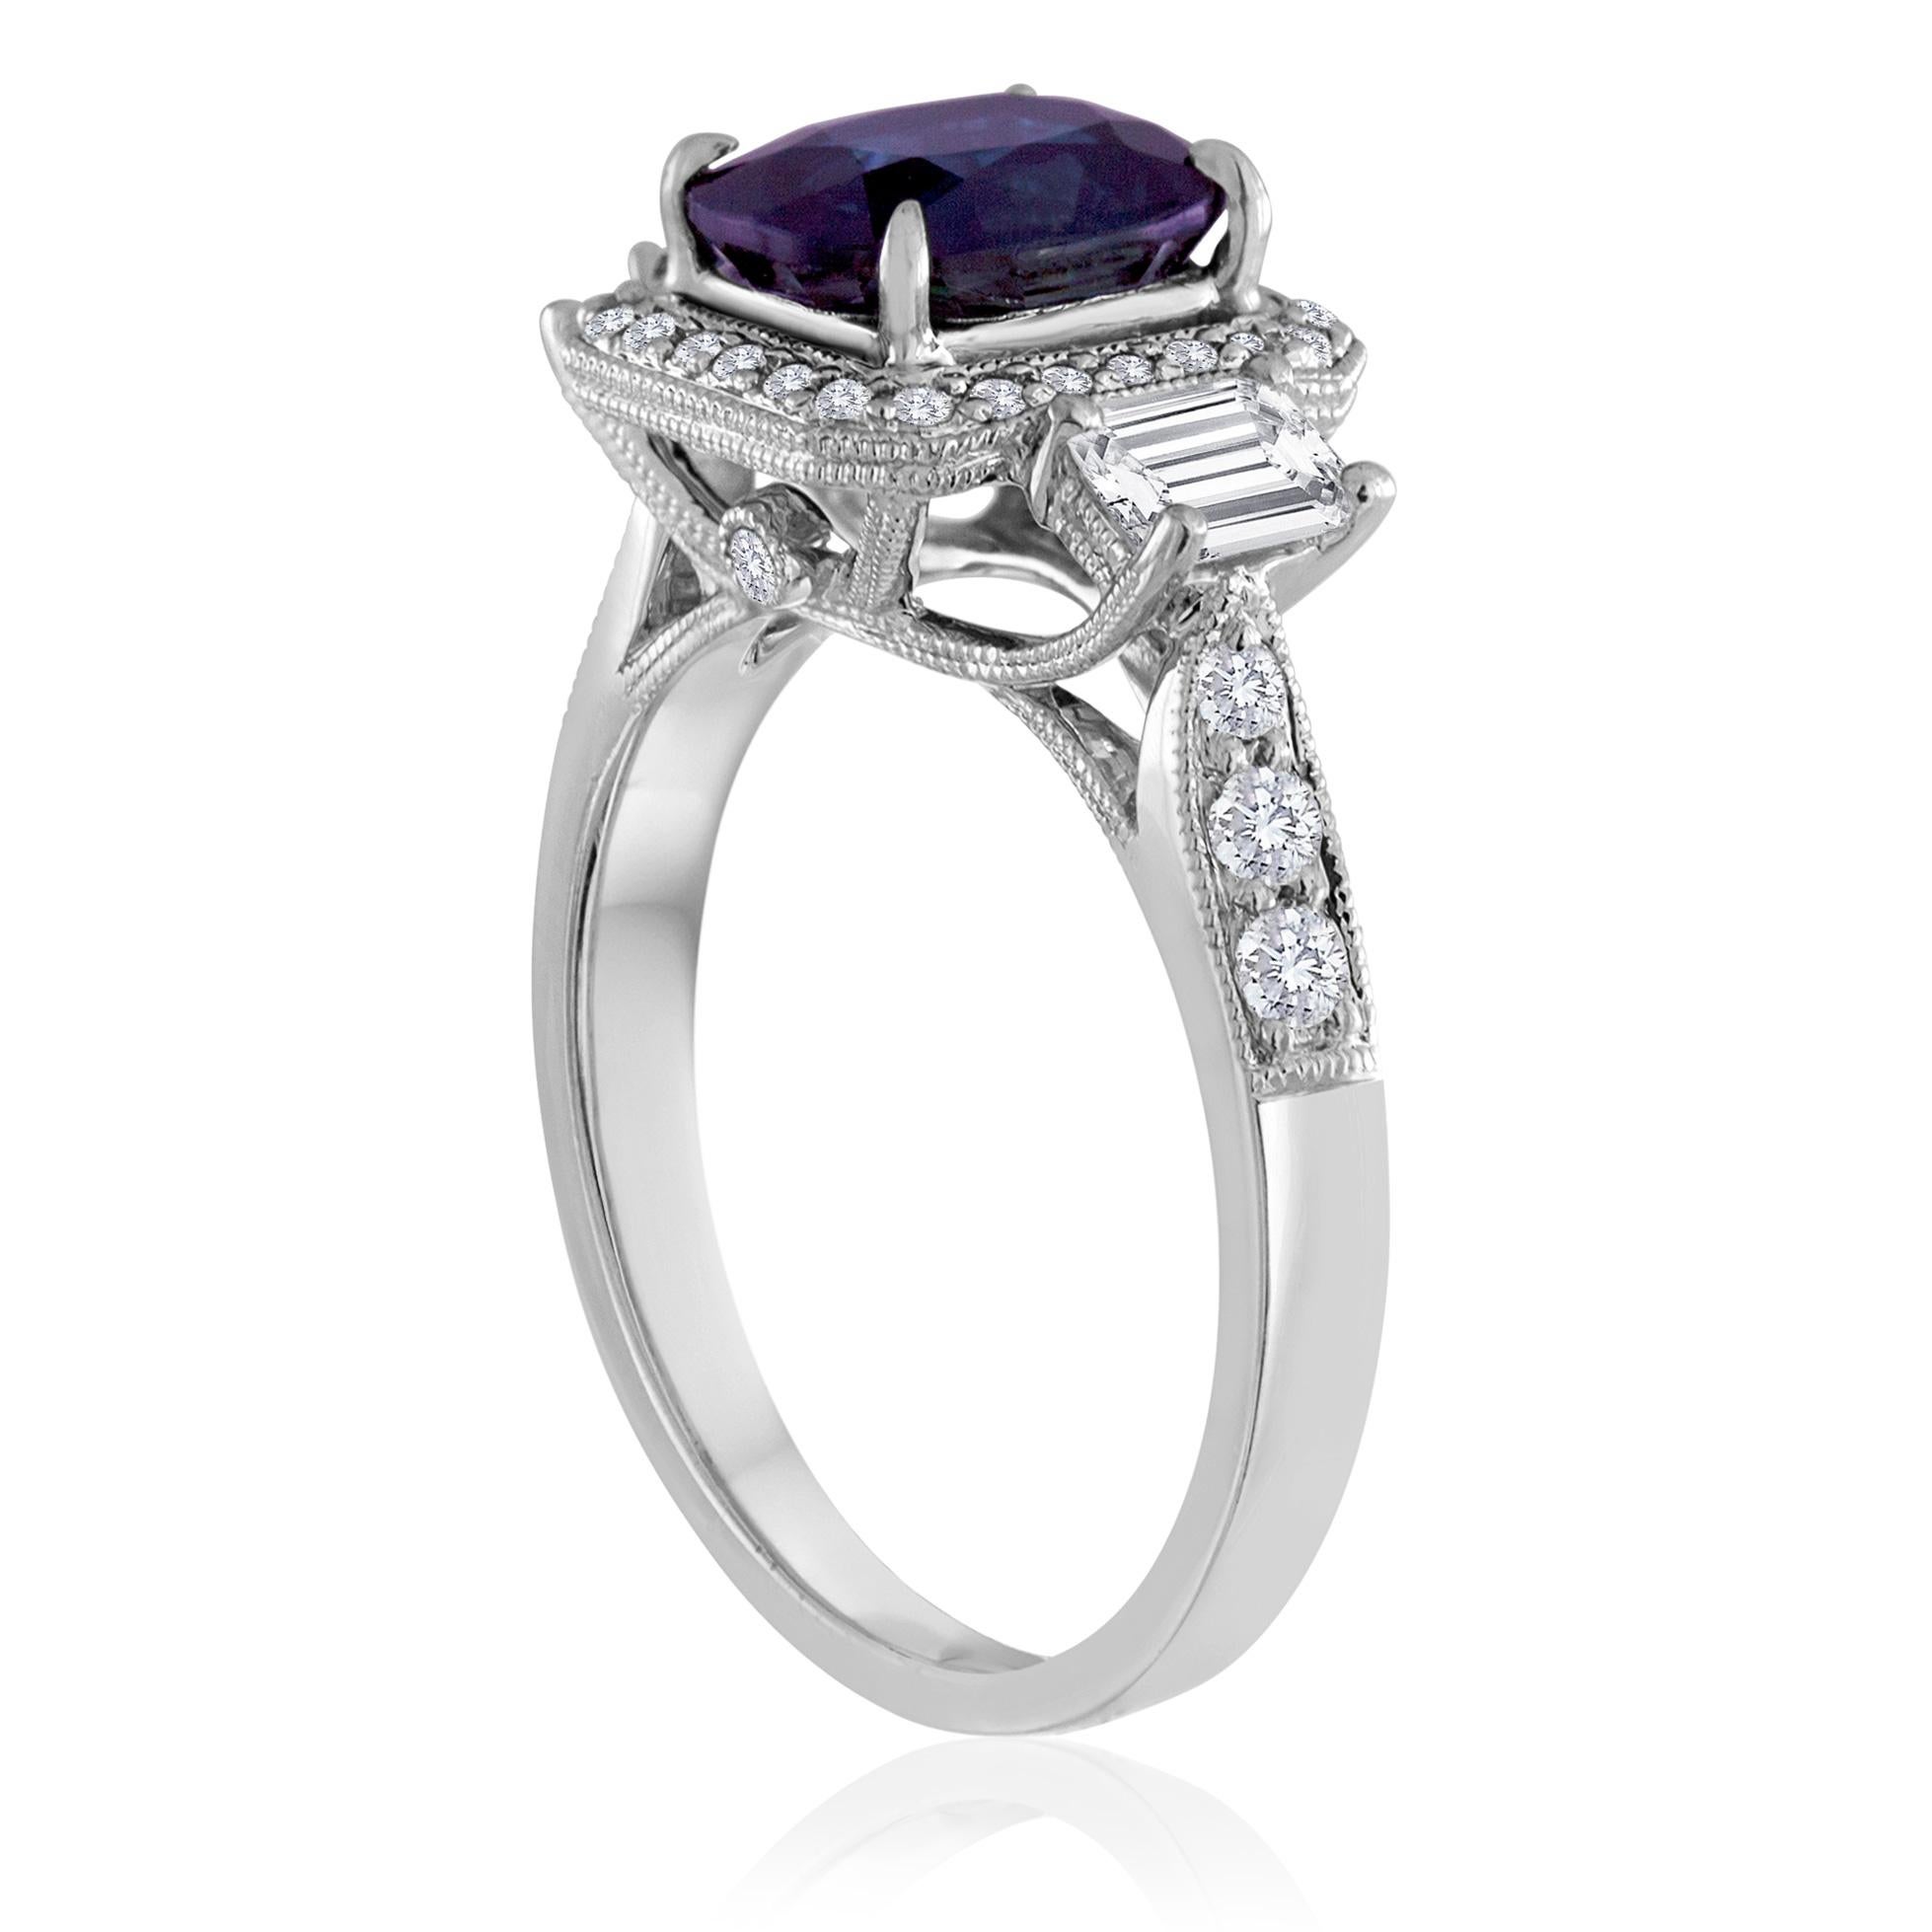 Classic Milgrain Square Halo Ring
The ring is 18K White Gold.
There are 0.89 Carats in Diamonds F/G VS/SI
The center stone is 2.16 Carat Oval Blue Sapphire
The sapphire has NO HEAT and is certified by LAPIS.
The ring is a size 6.25, sizable.
The